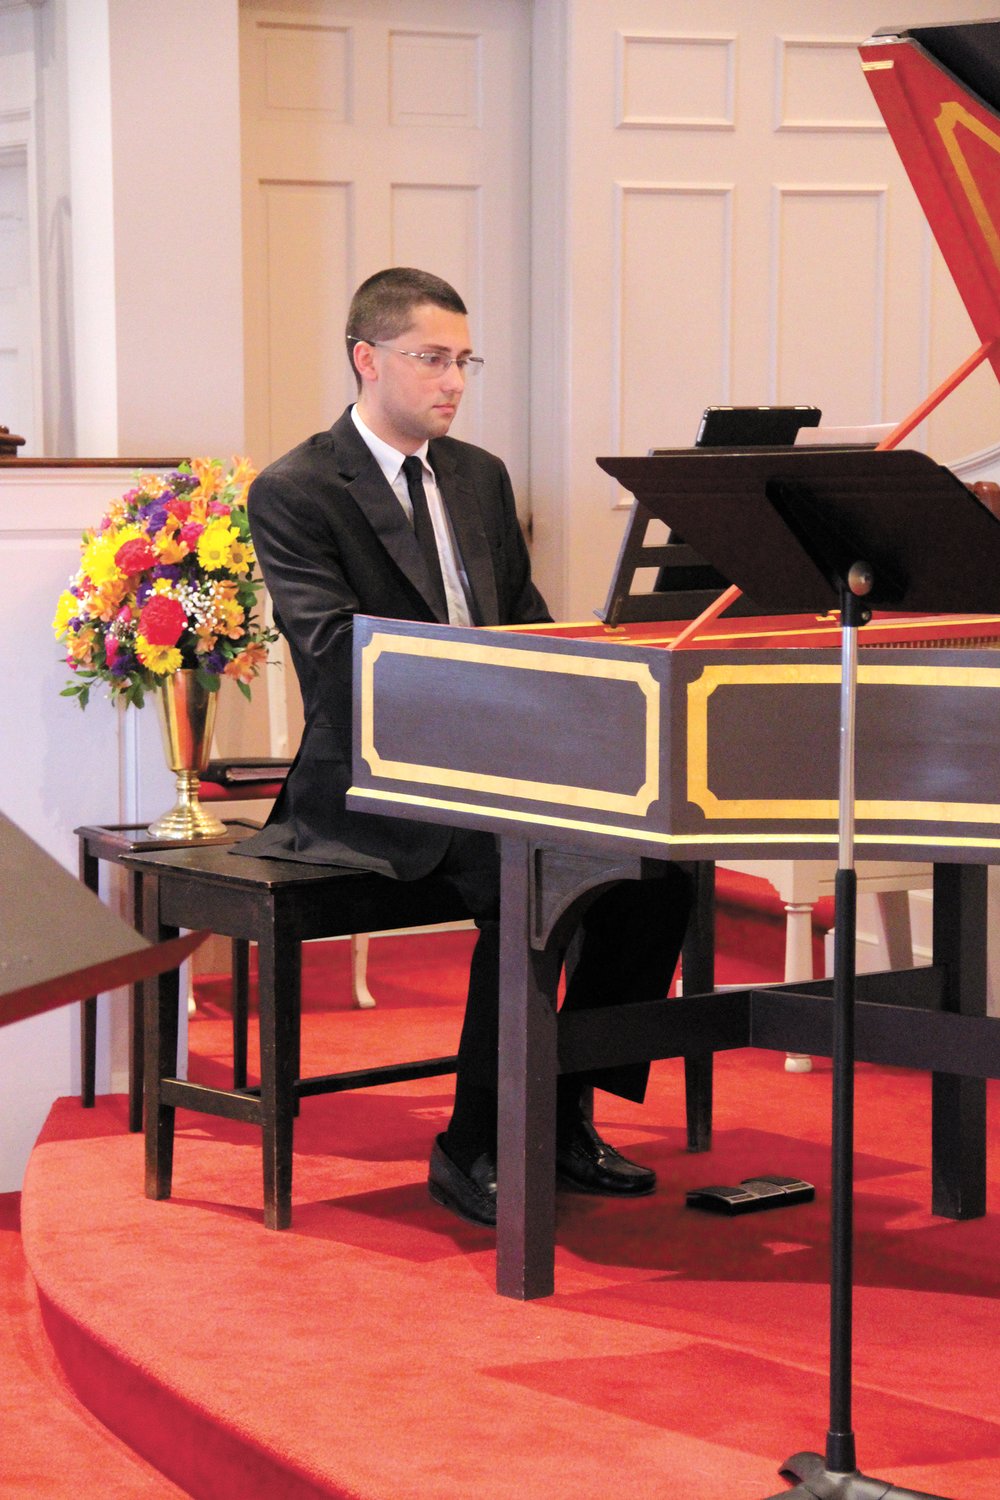 AT THE KEYBOARD: John Black, director of music at Greenwood Community Church, organized the dedication recital and played the harpsicord.